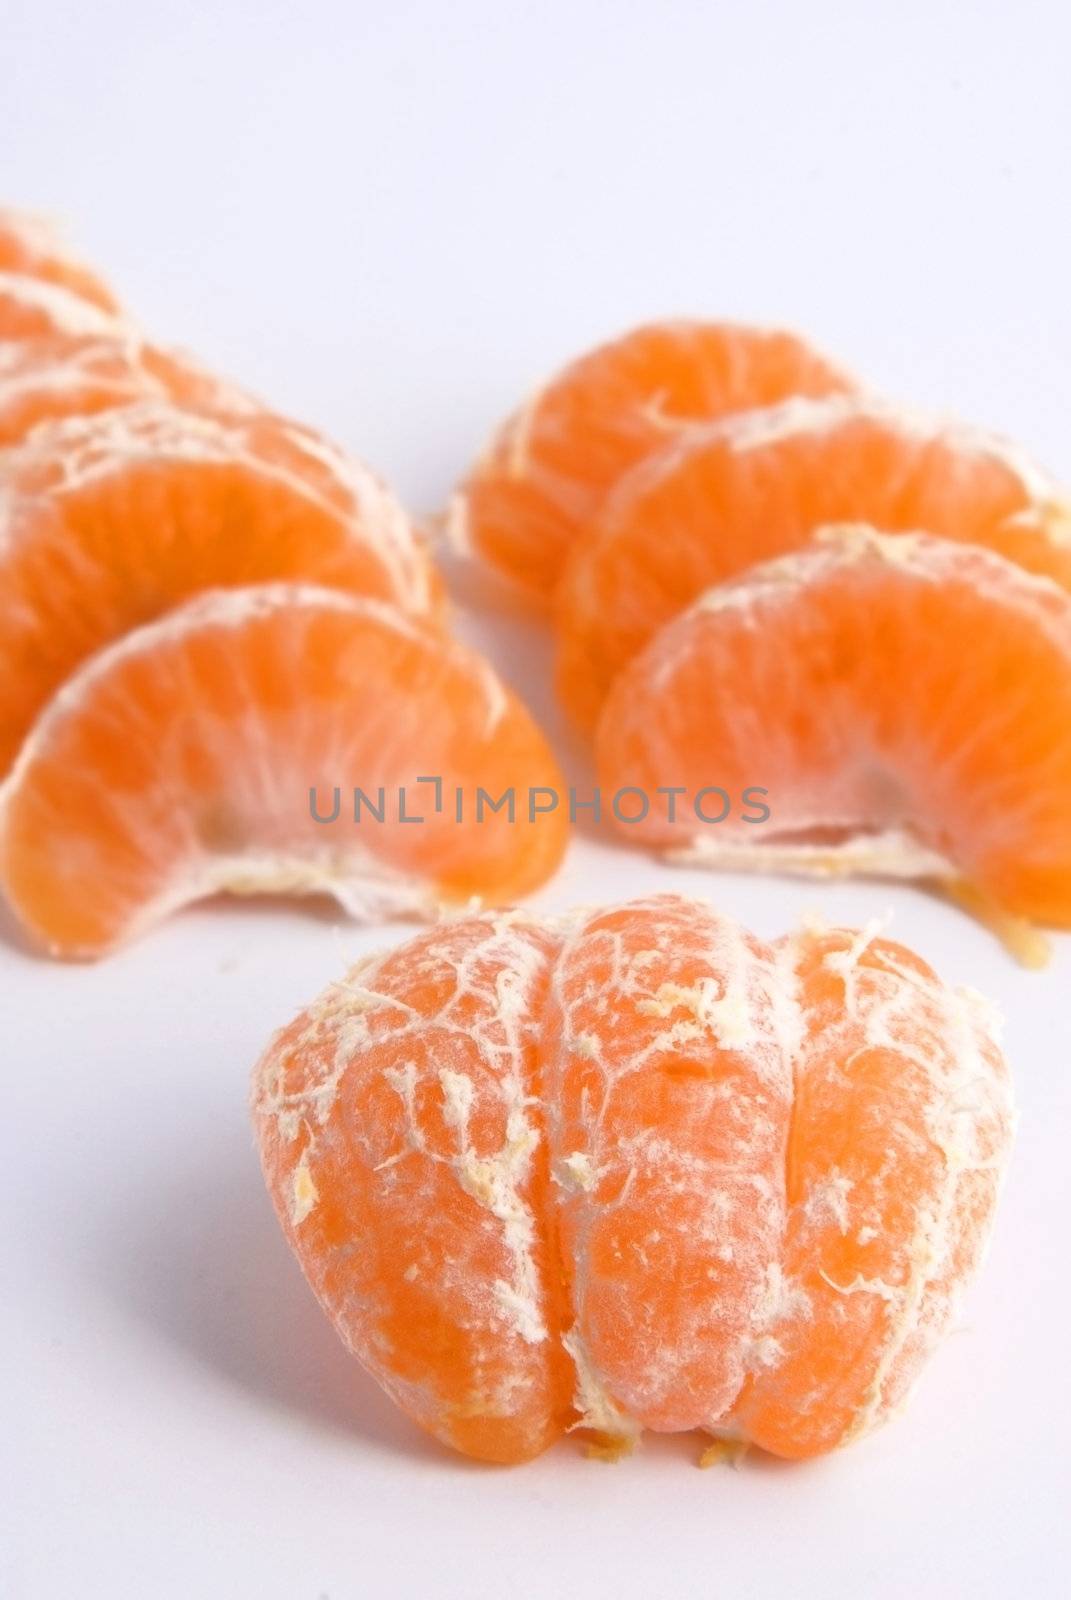 Tangerine fruit over white by cienpies